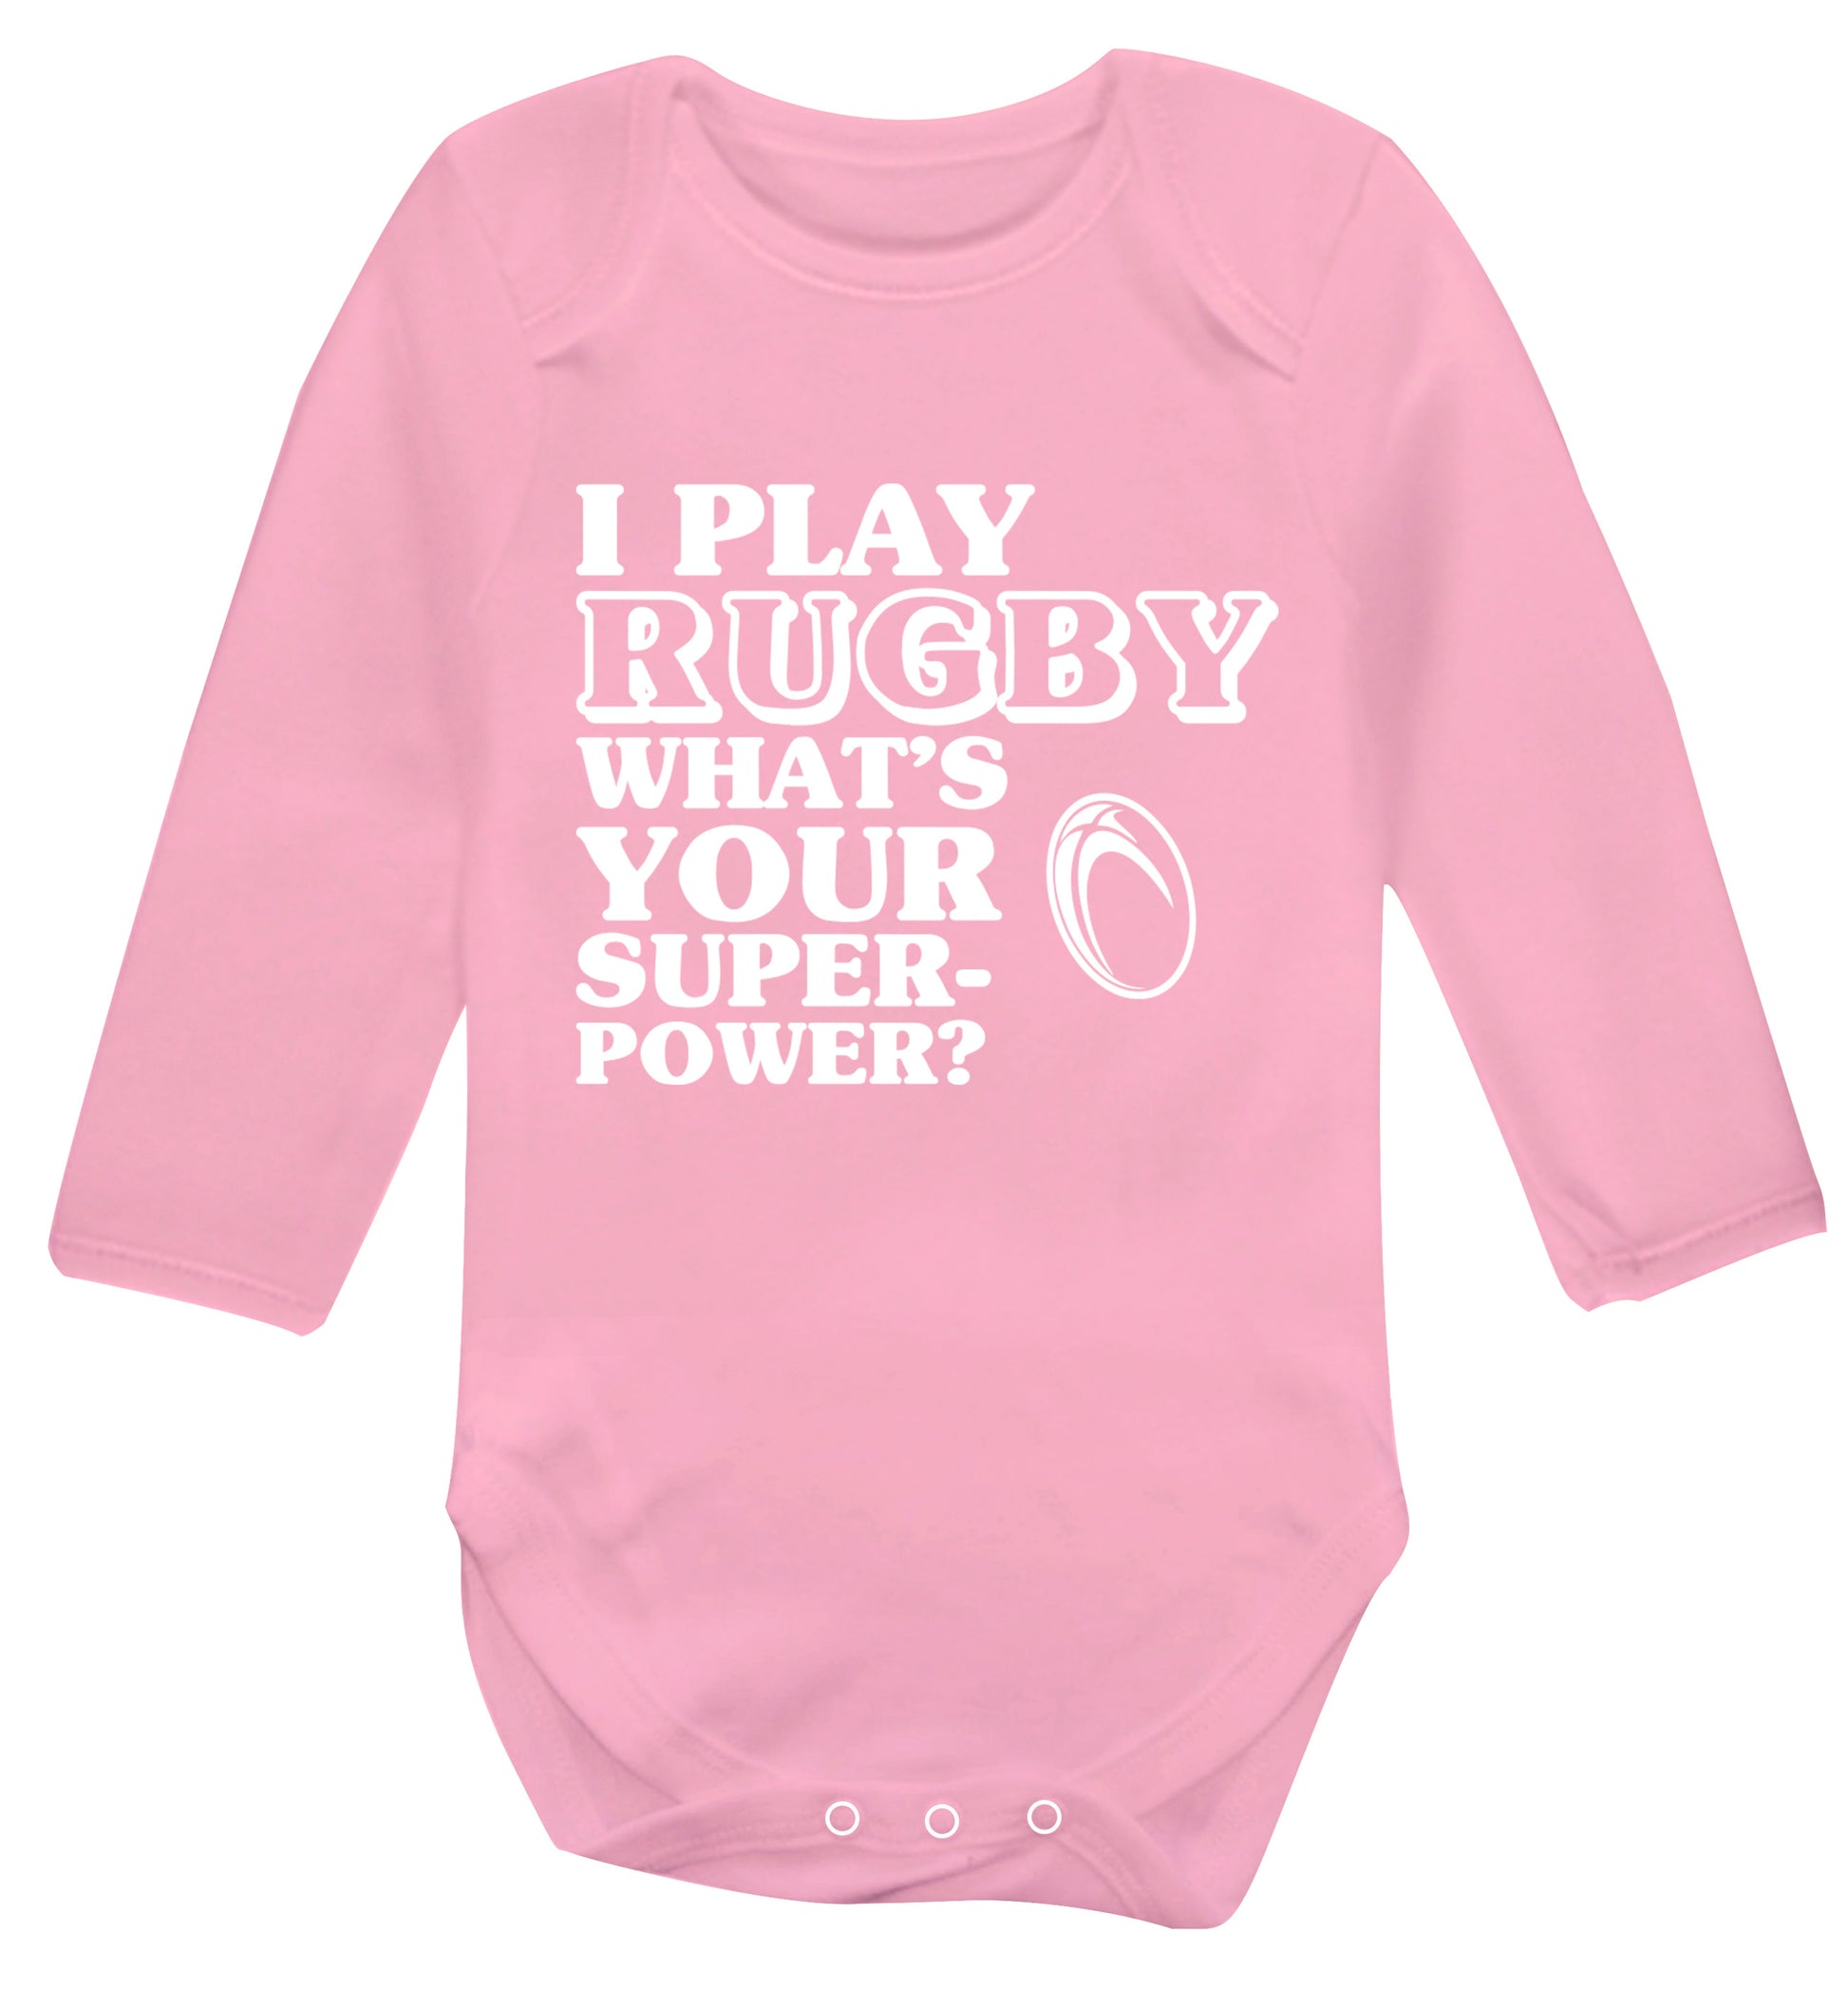 I play rugby what's your superpower? Baby Vest long sleeved pale pink 6-12 months